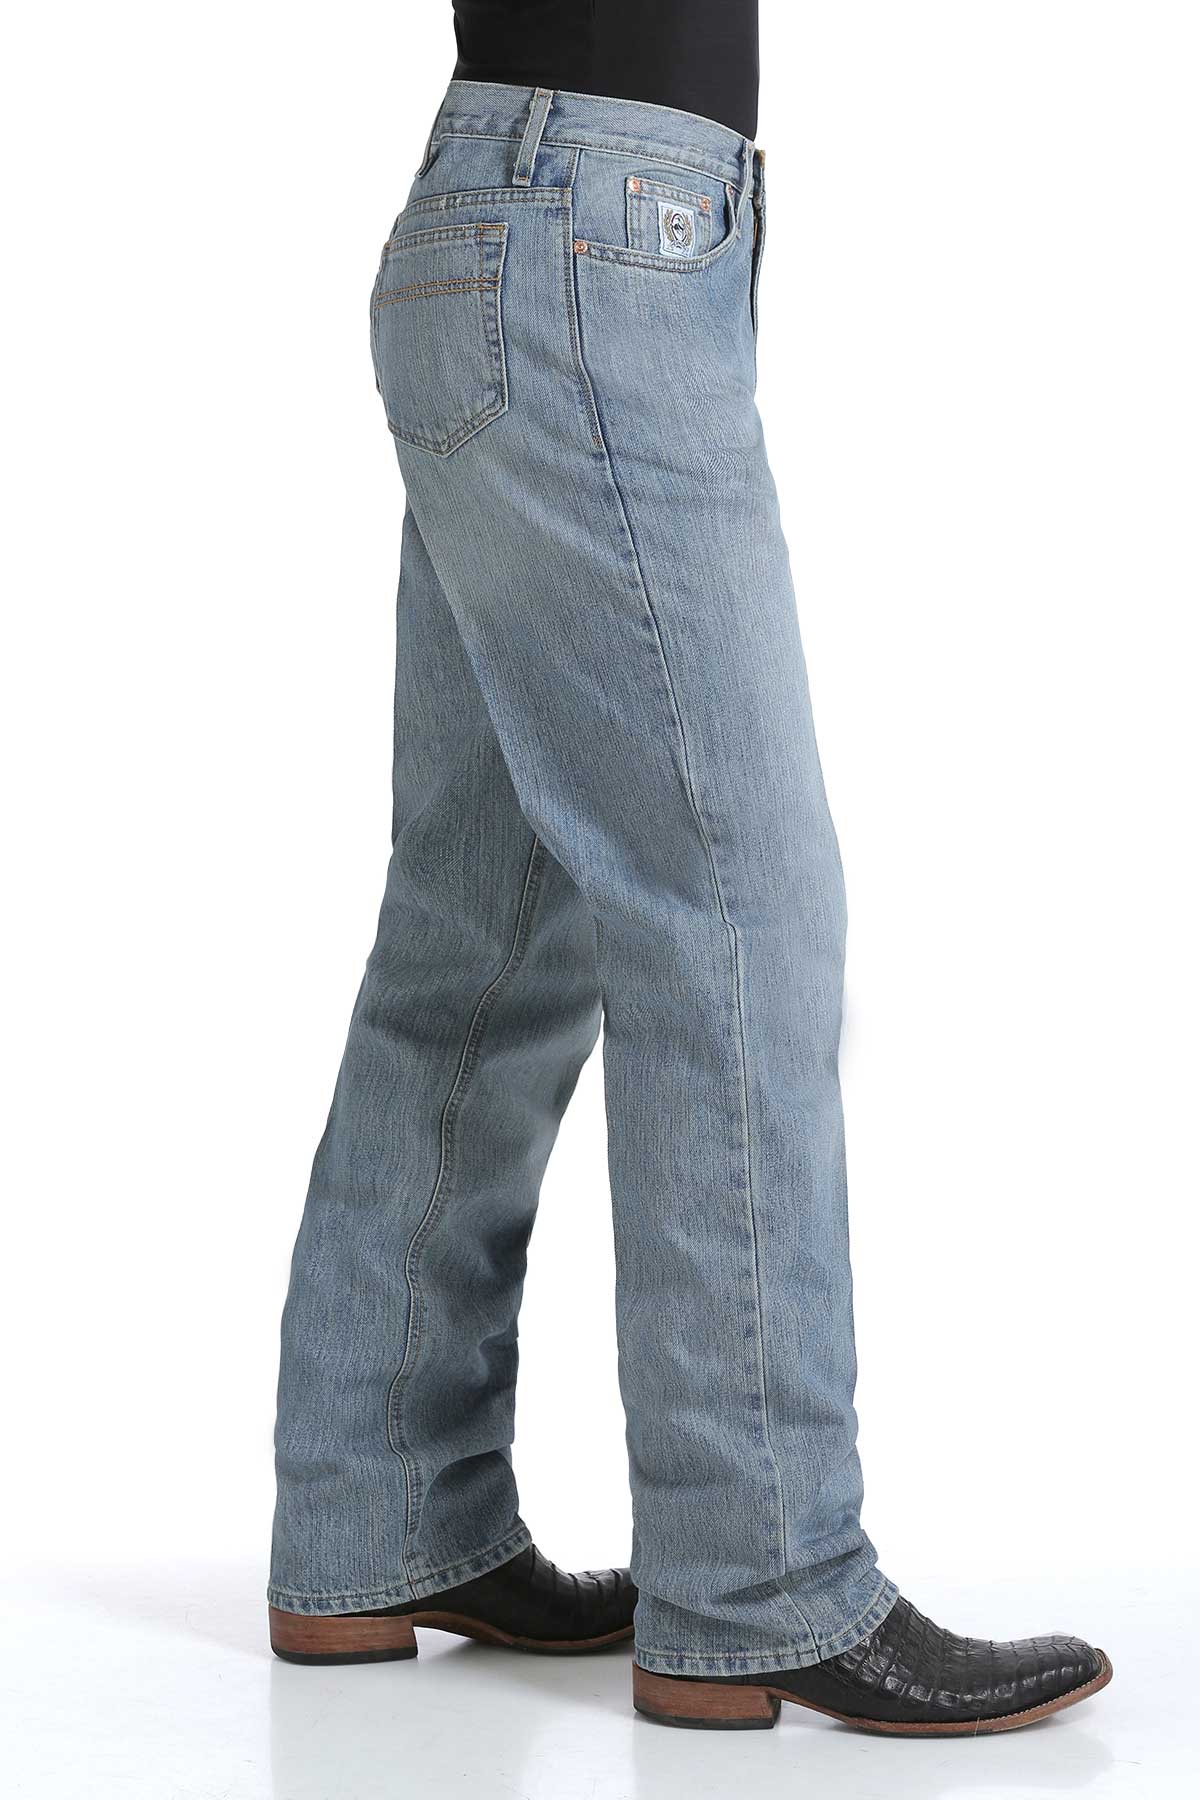 Cinch Men's White Label Relaxed Straight in Light Stonewash